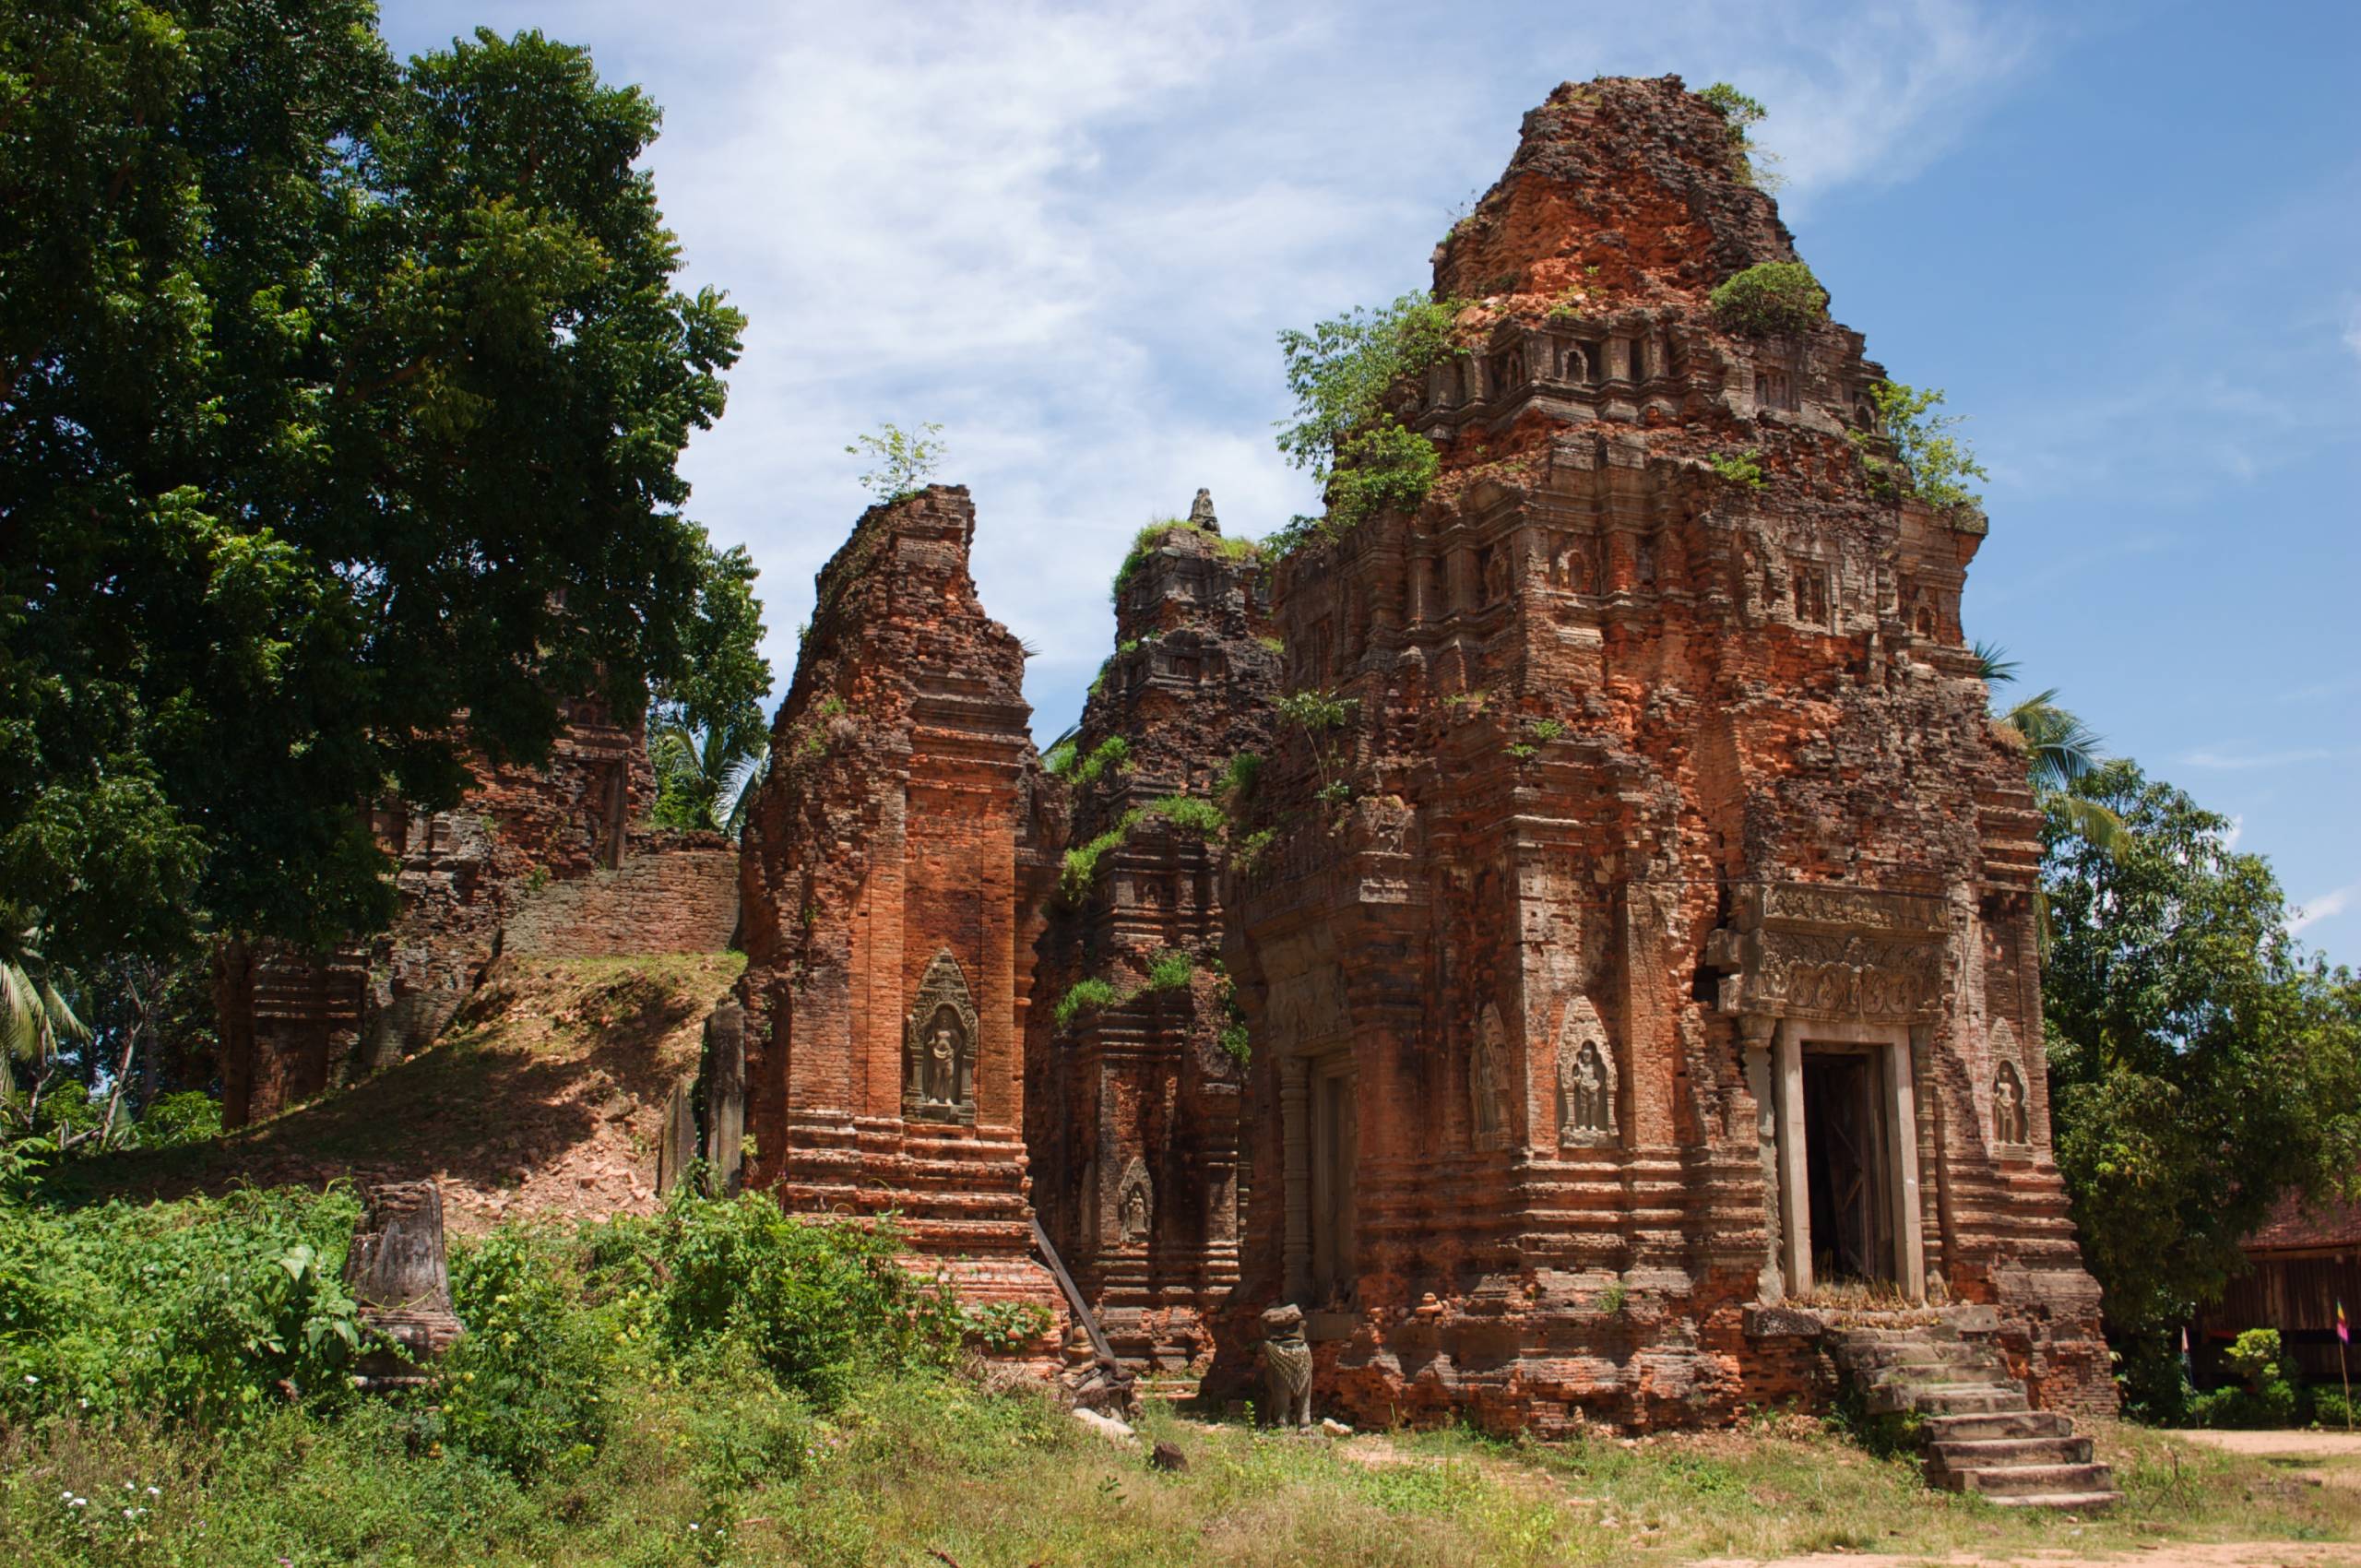 Aerial view of Lolei Temple, an ancient Hindu temple in Cambodia